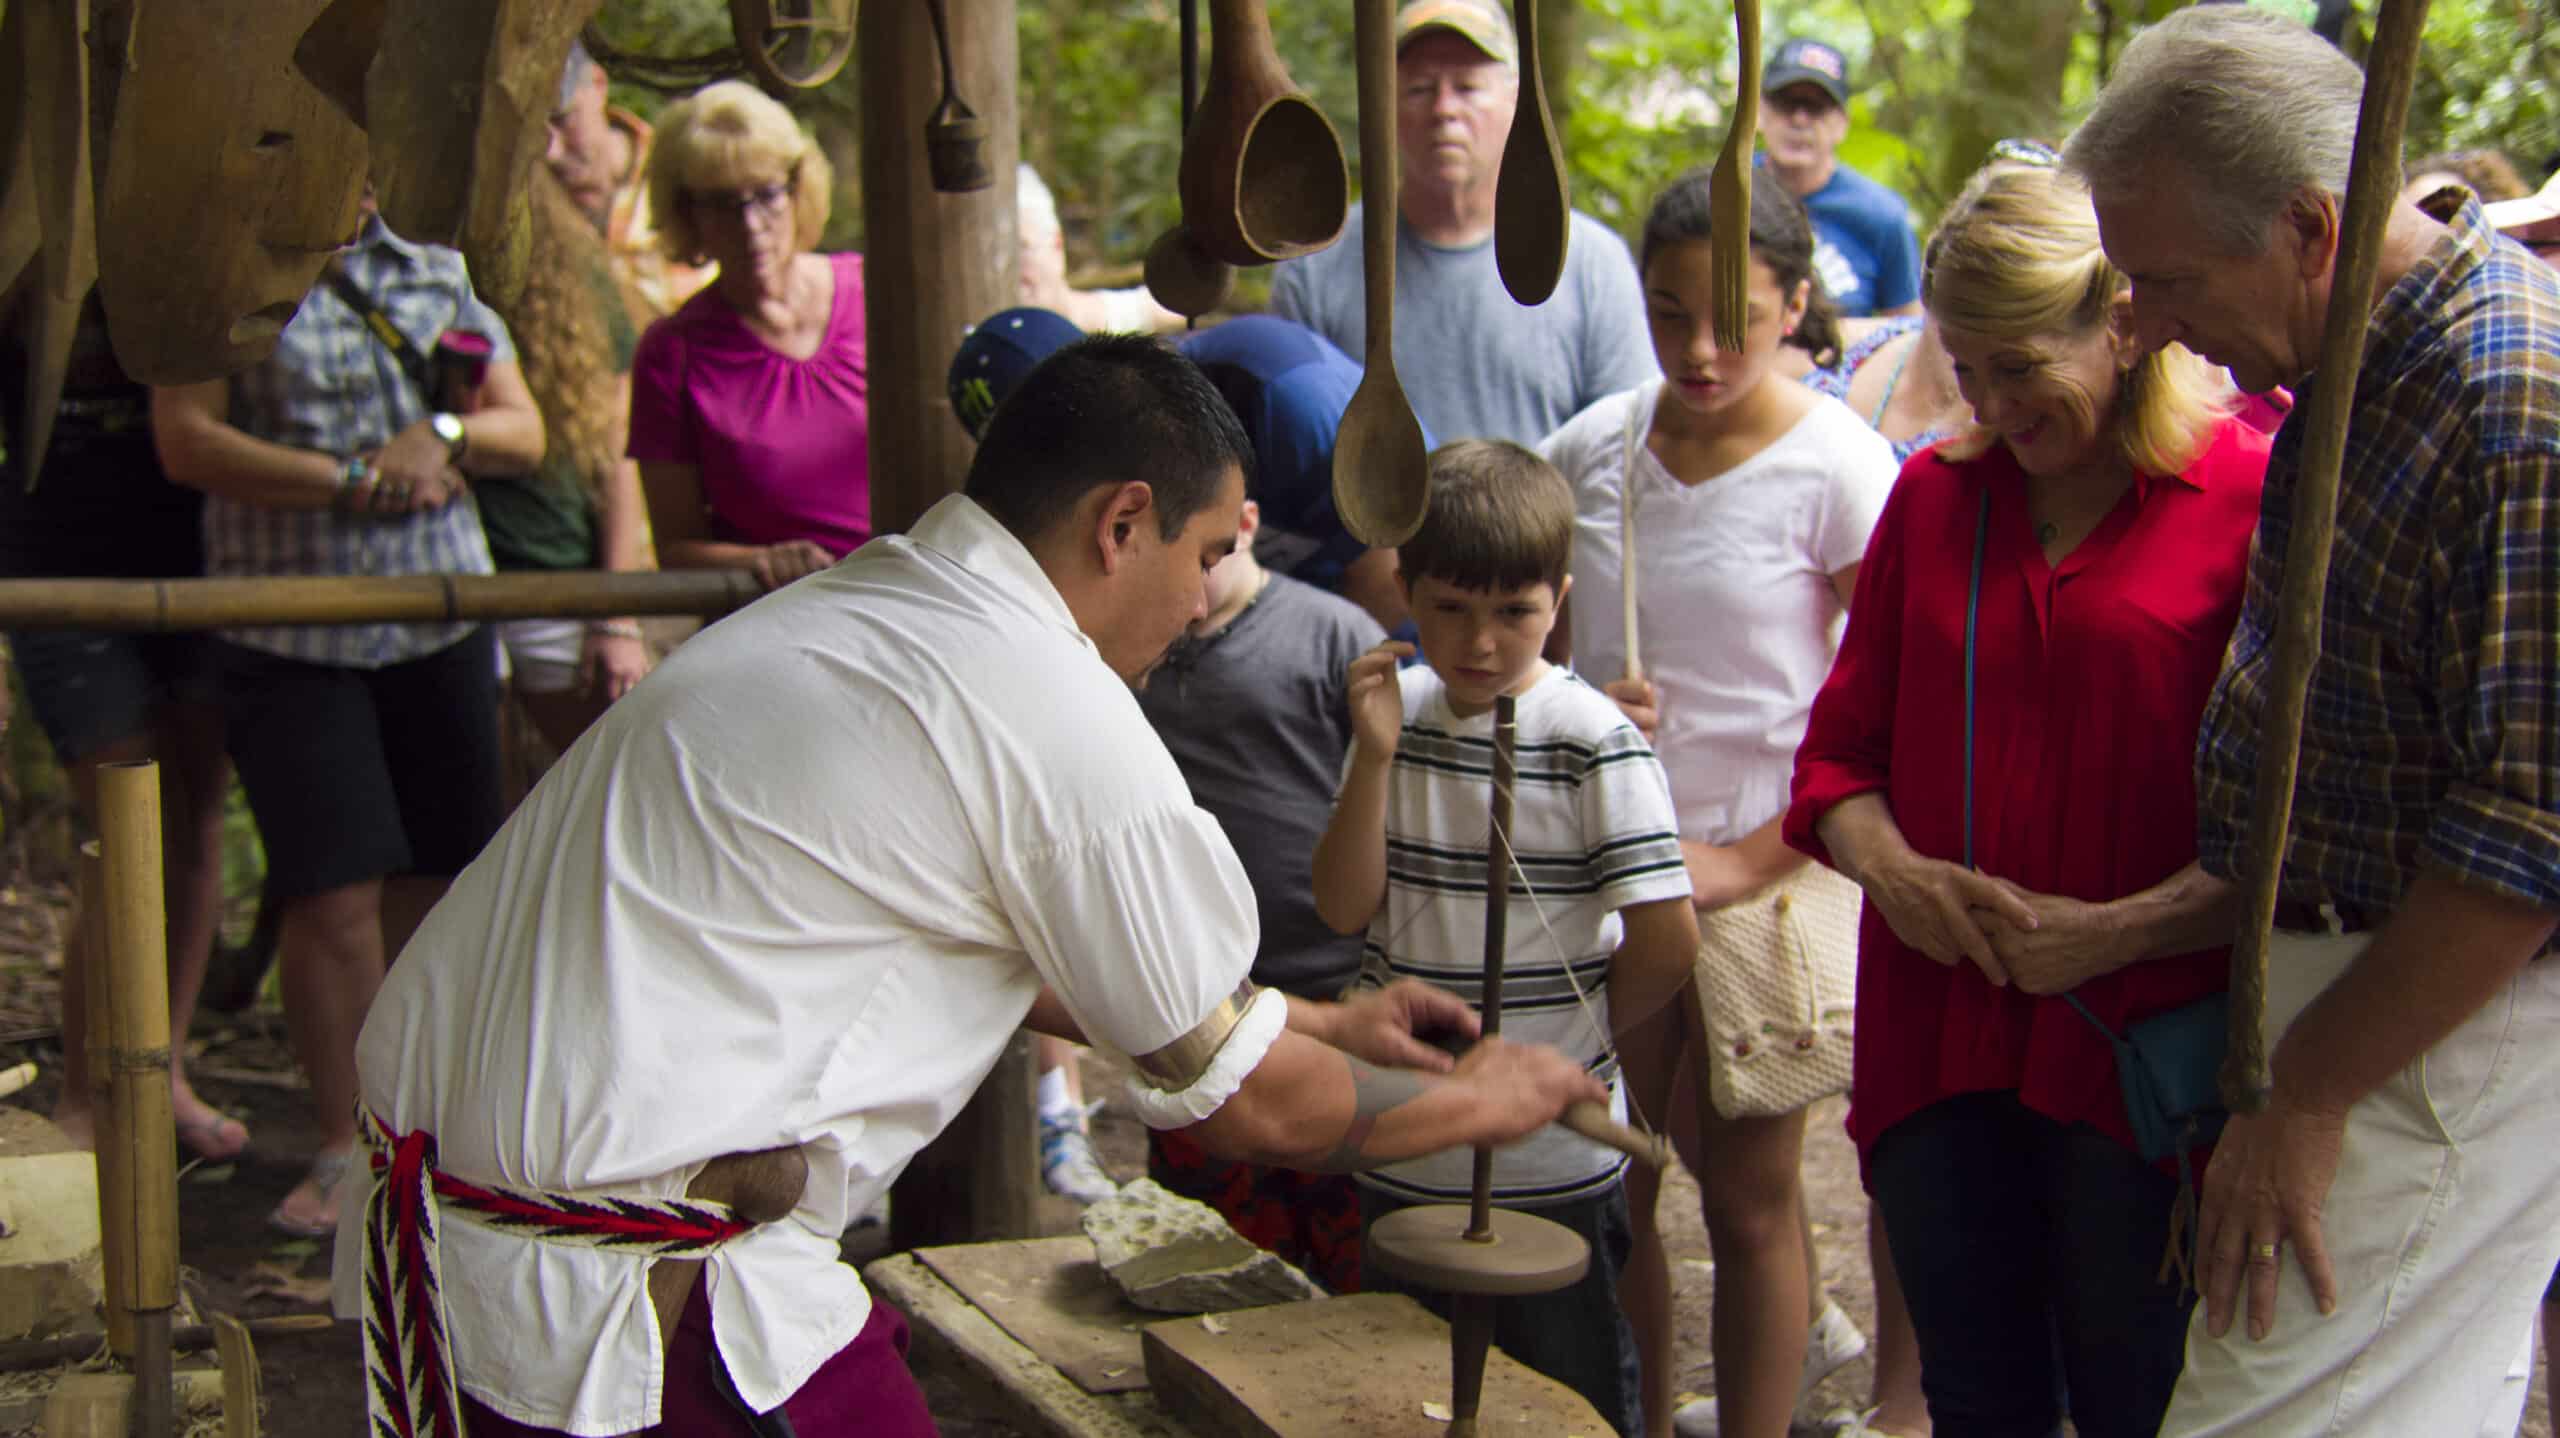 A craftsman demonstrates traditional pottery making to an interested group of people, including children and adults, at the Oconaluftee Indian Village in an outdoor setting surrounded by trees.